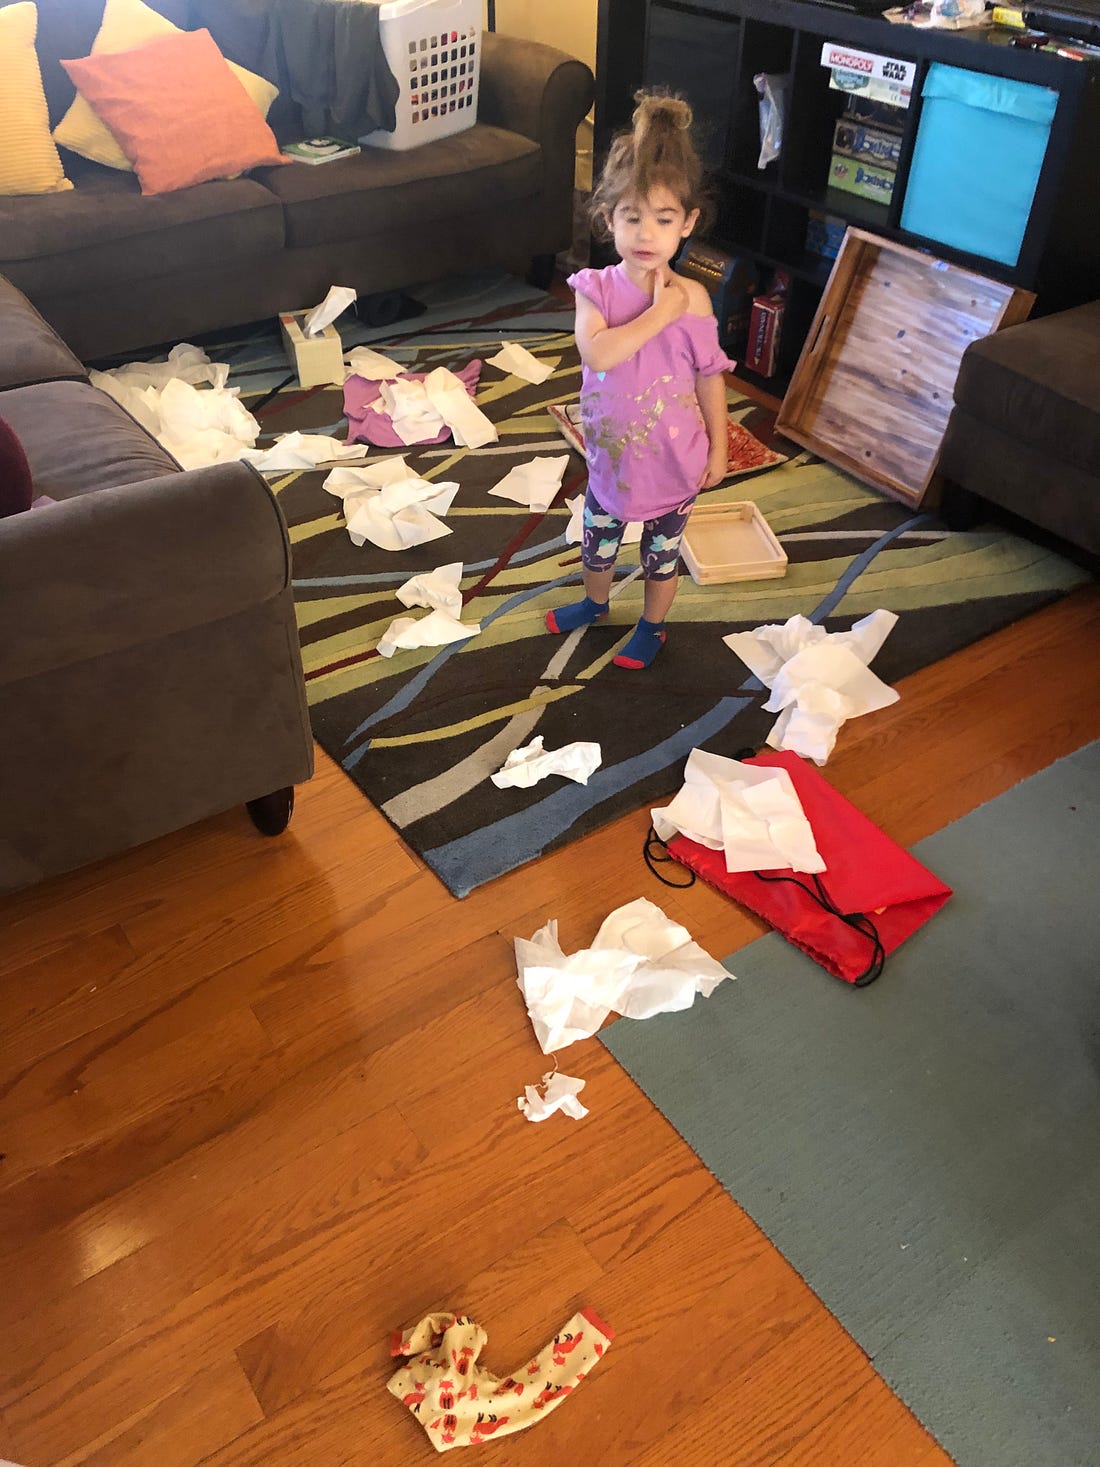 Photo shows a 3 year old who has pulled all of the tissues out of the box and scattered them everywhere.